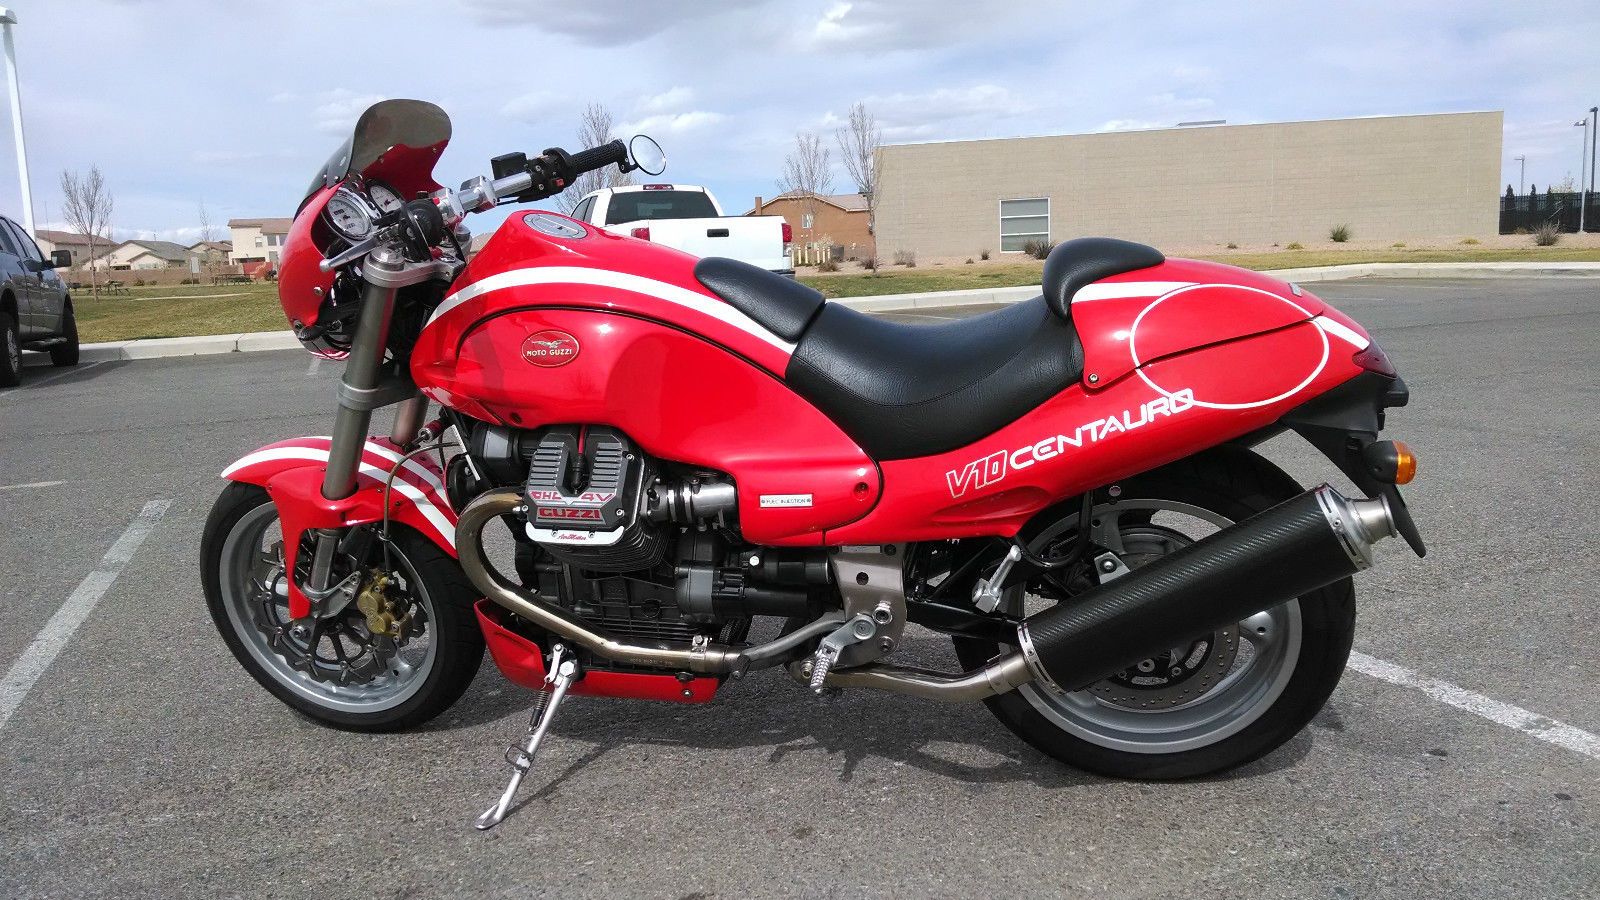 red Moto Guzzi Centauro parked in the middle of the road